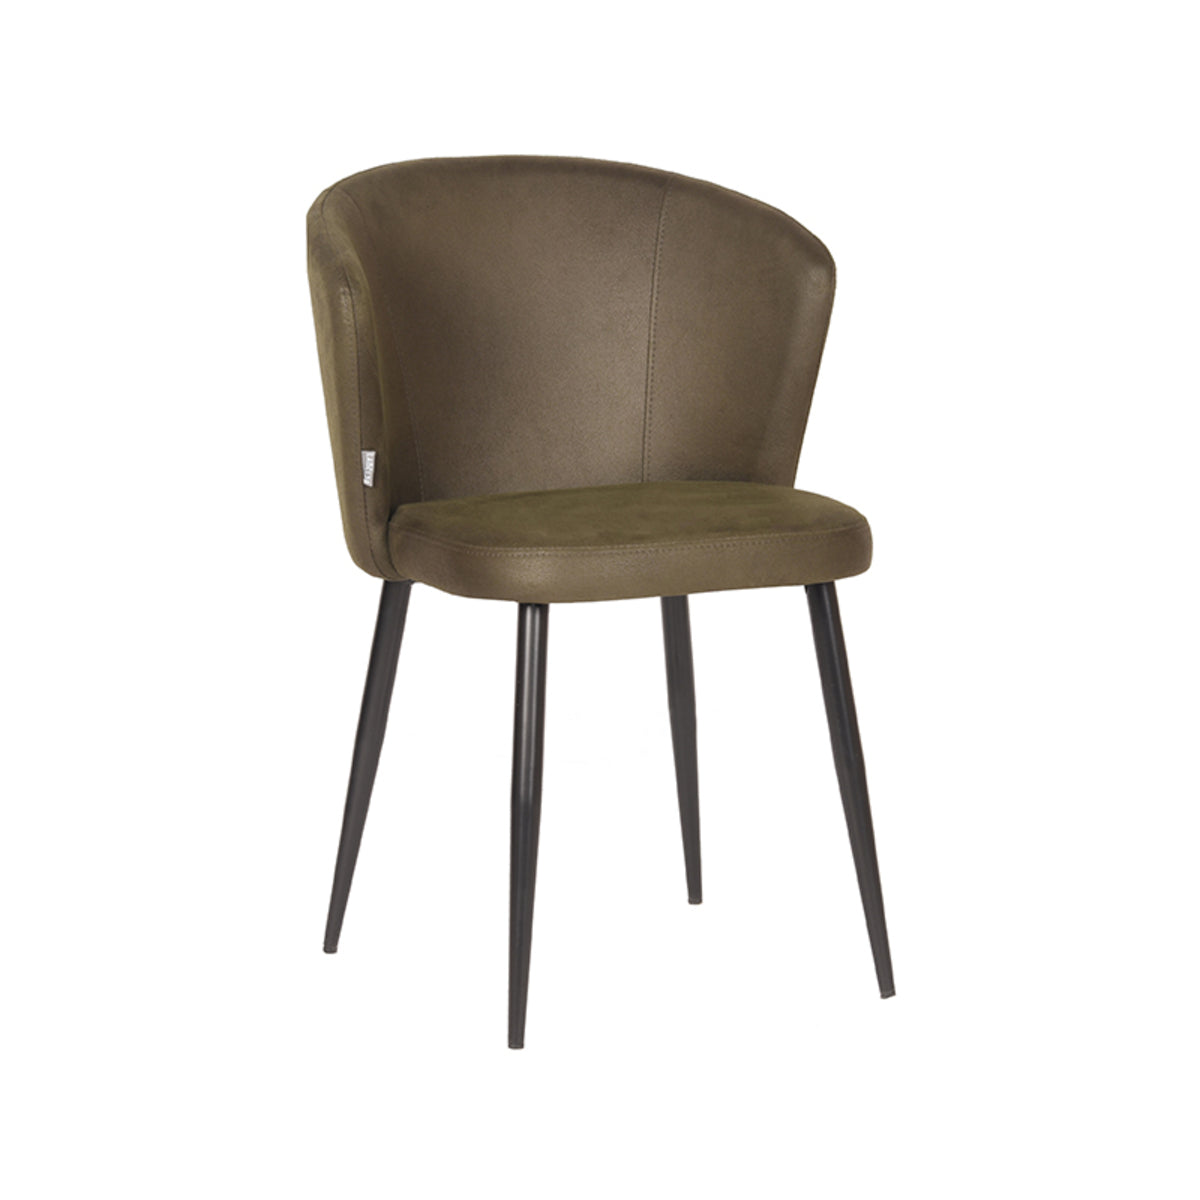 LABEL51 Dining room chair Wave - Army green - Microfiber | 2 pieces